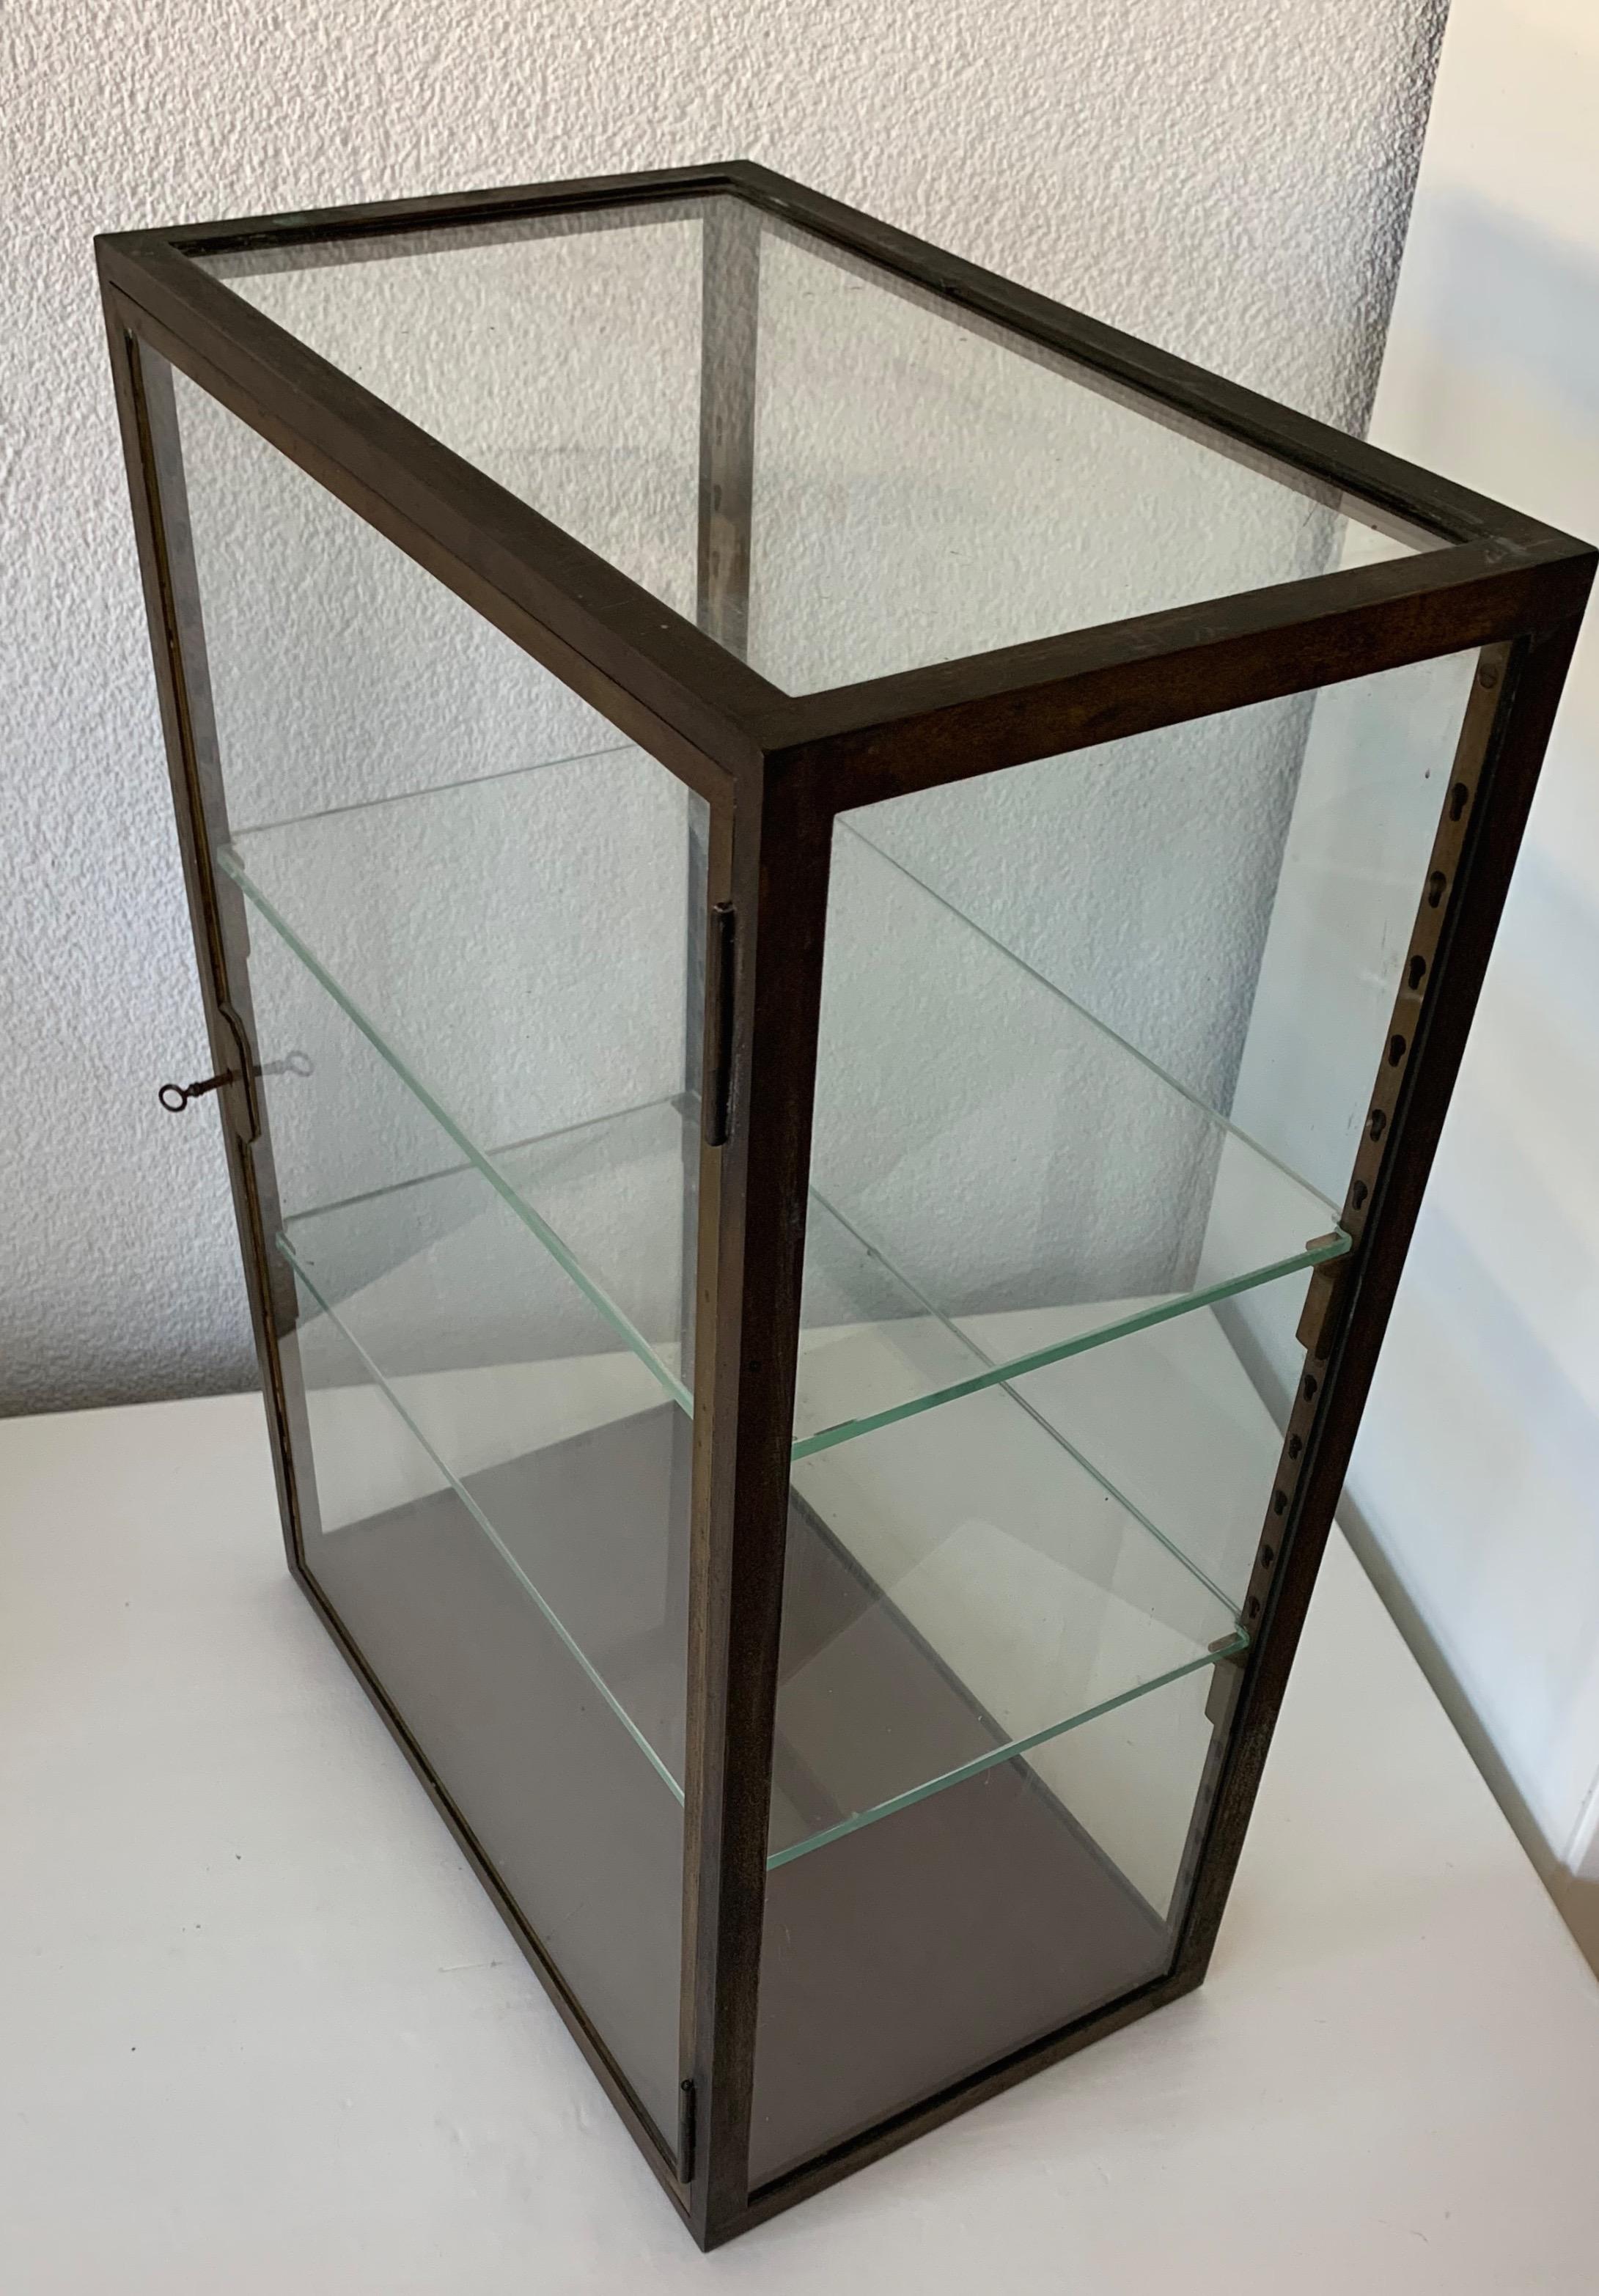 Top Quality Antique Brass & Glass Display Cabinet for Rolex / Jewelry Collection 7